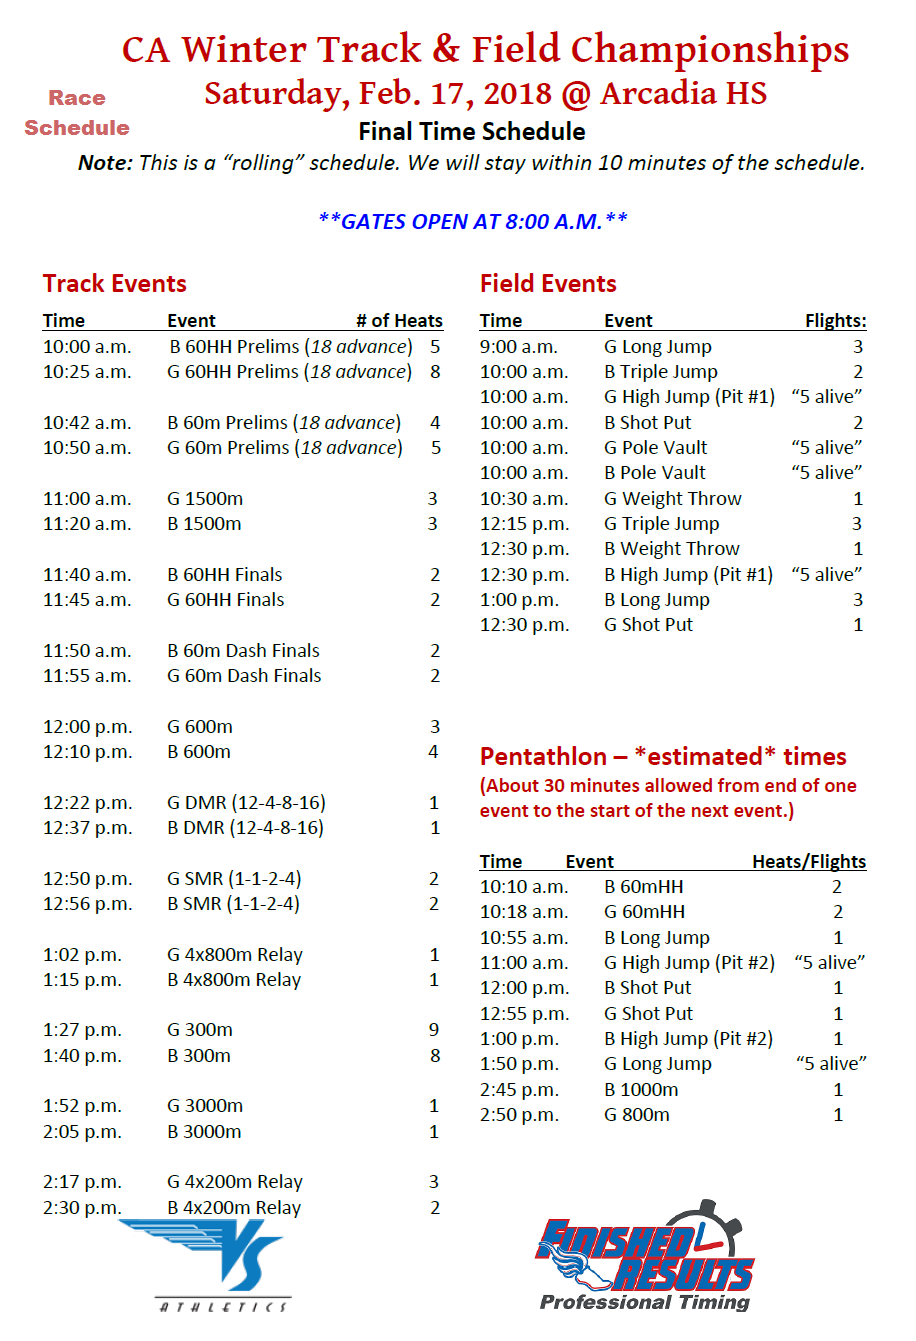 2018-02-17 - Race Schedule - Winter Championships at Arcadia